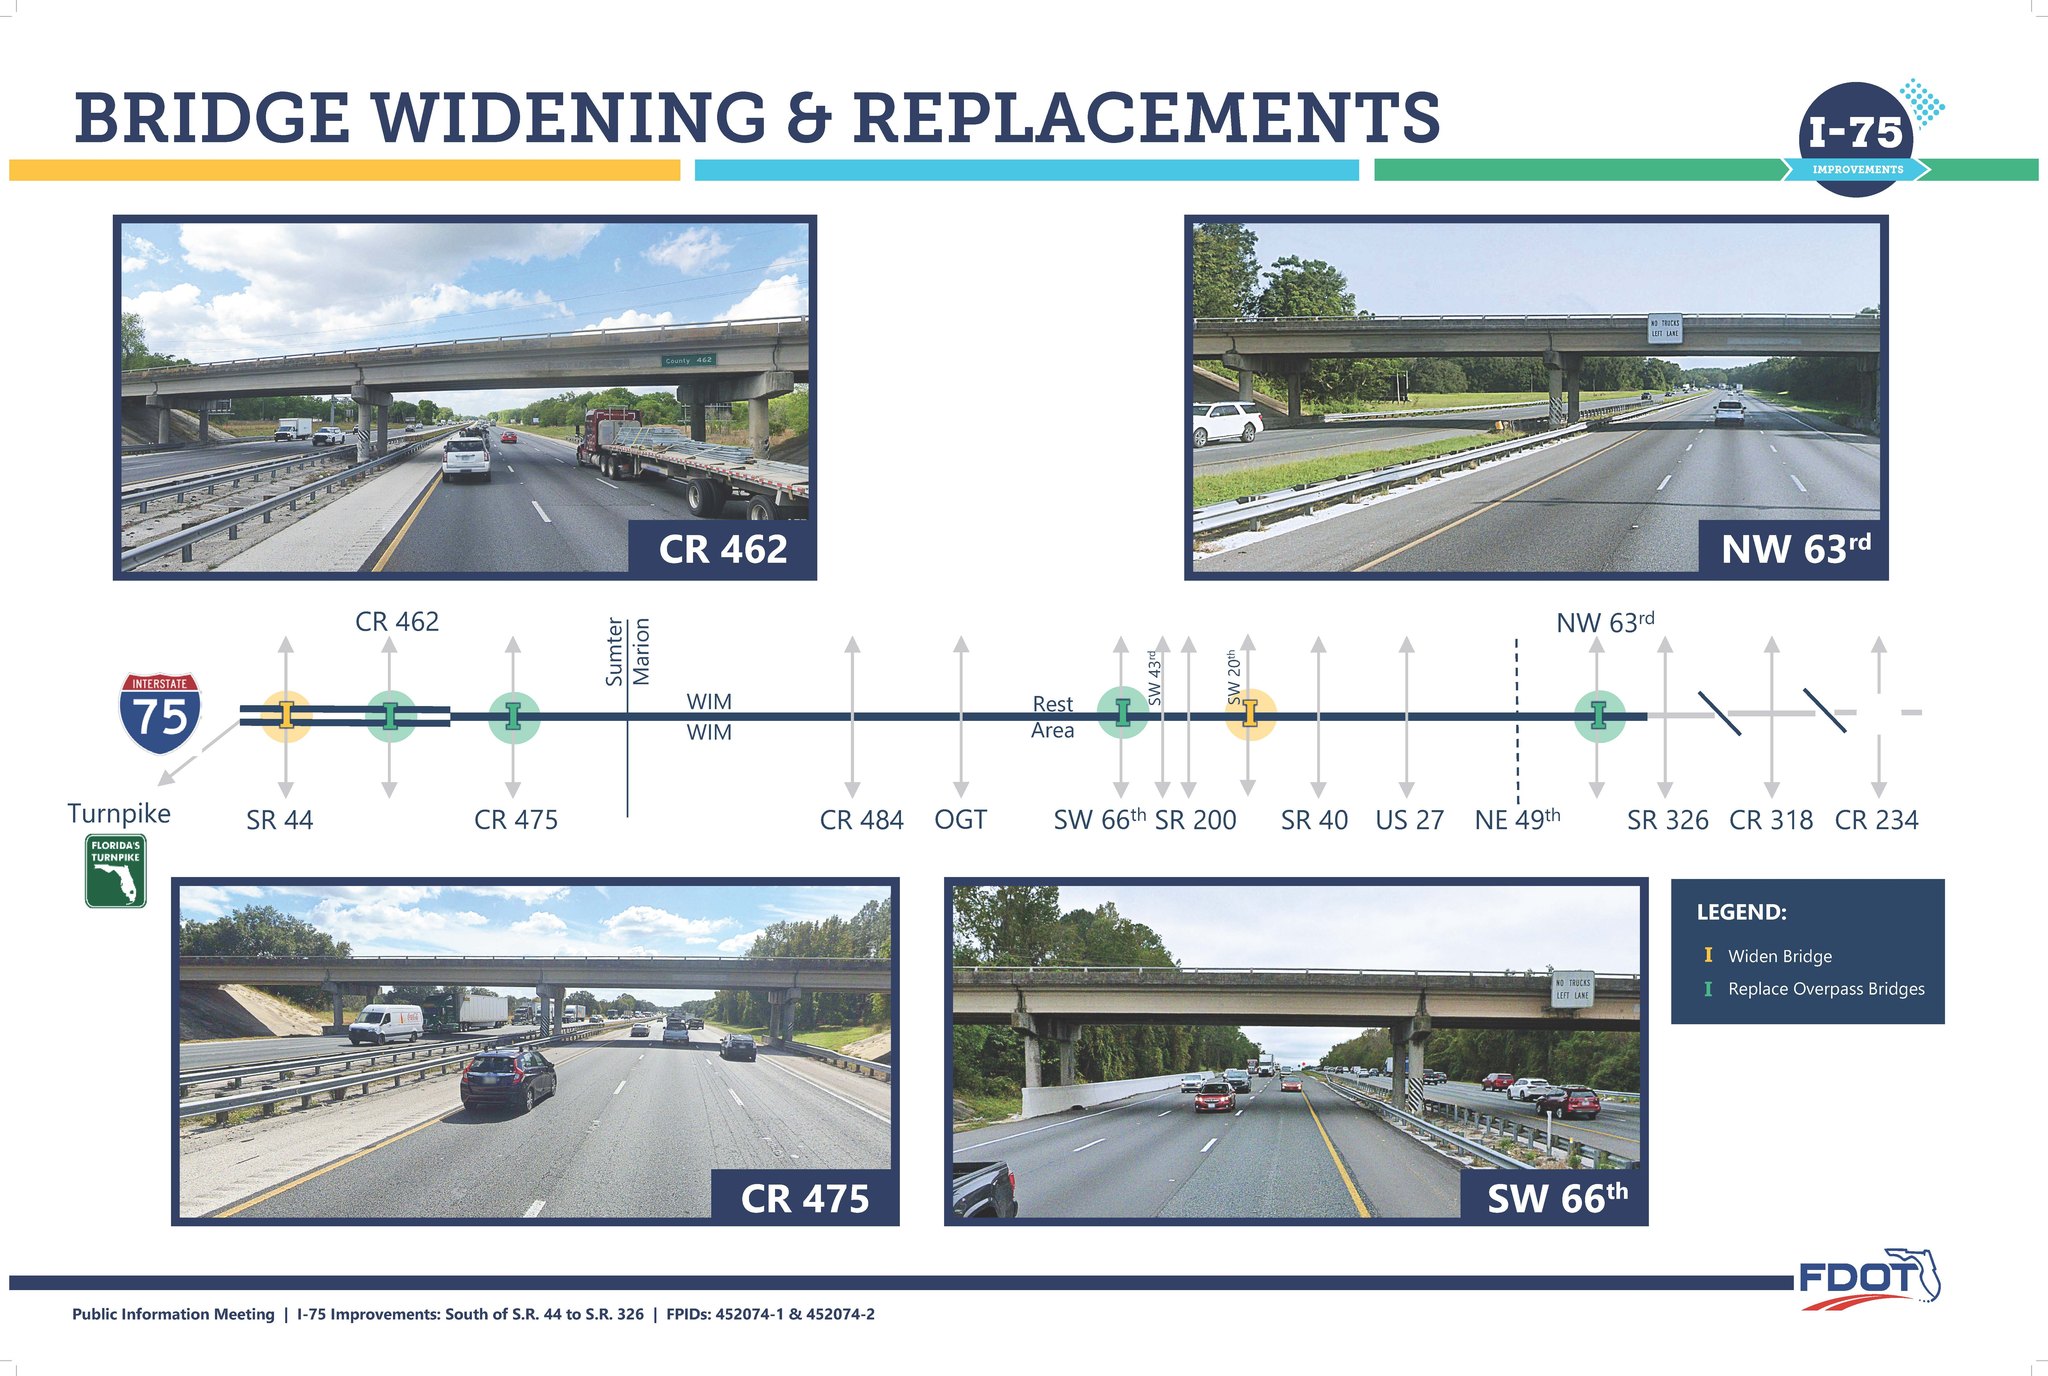 Ocala I-75 bridge and overpass widening and replacement